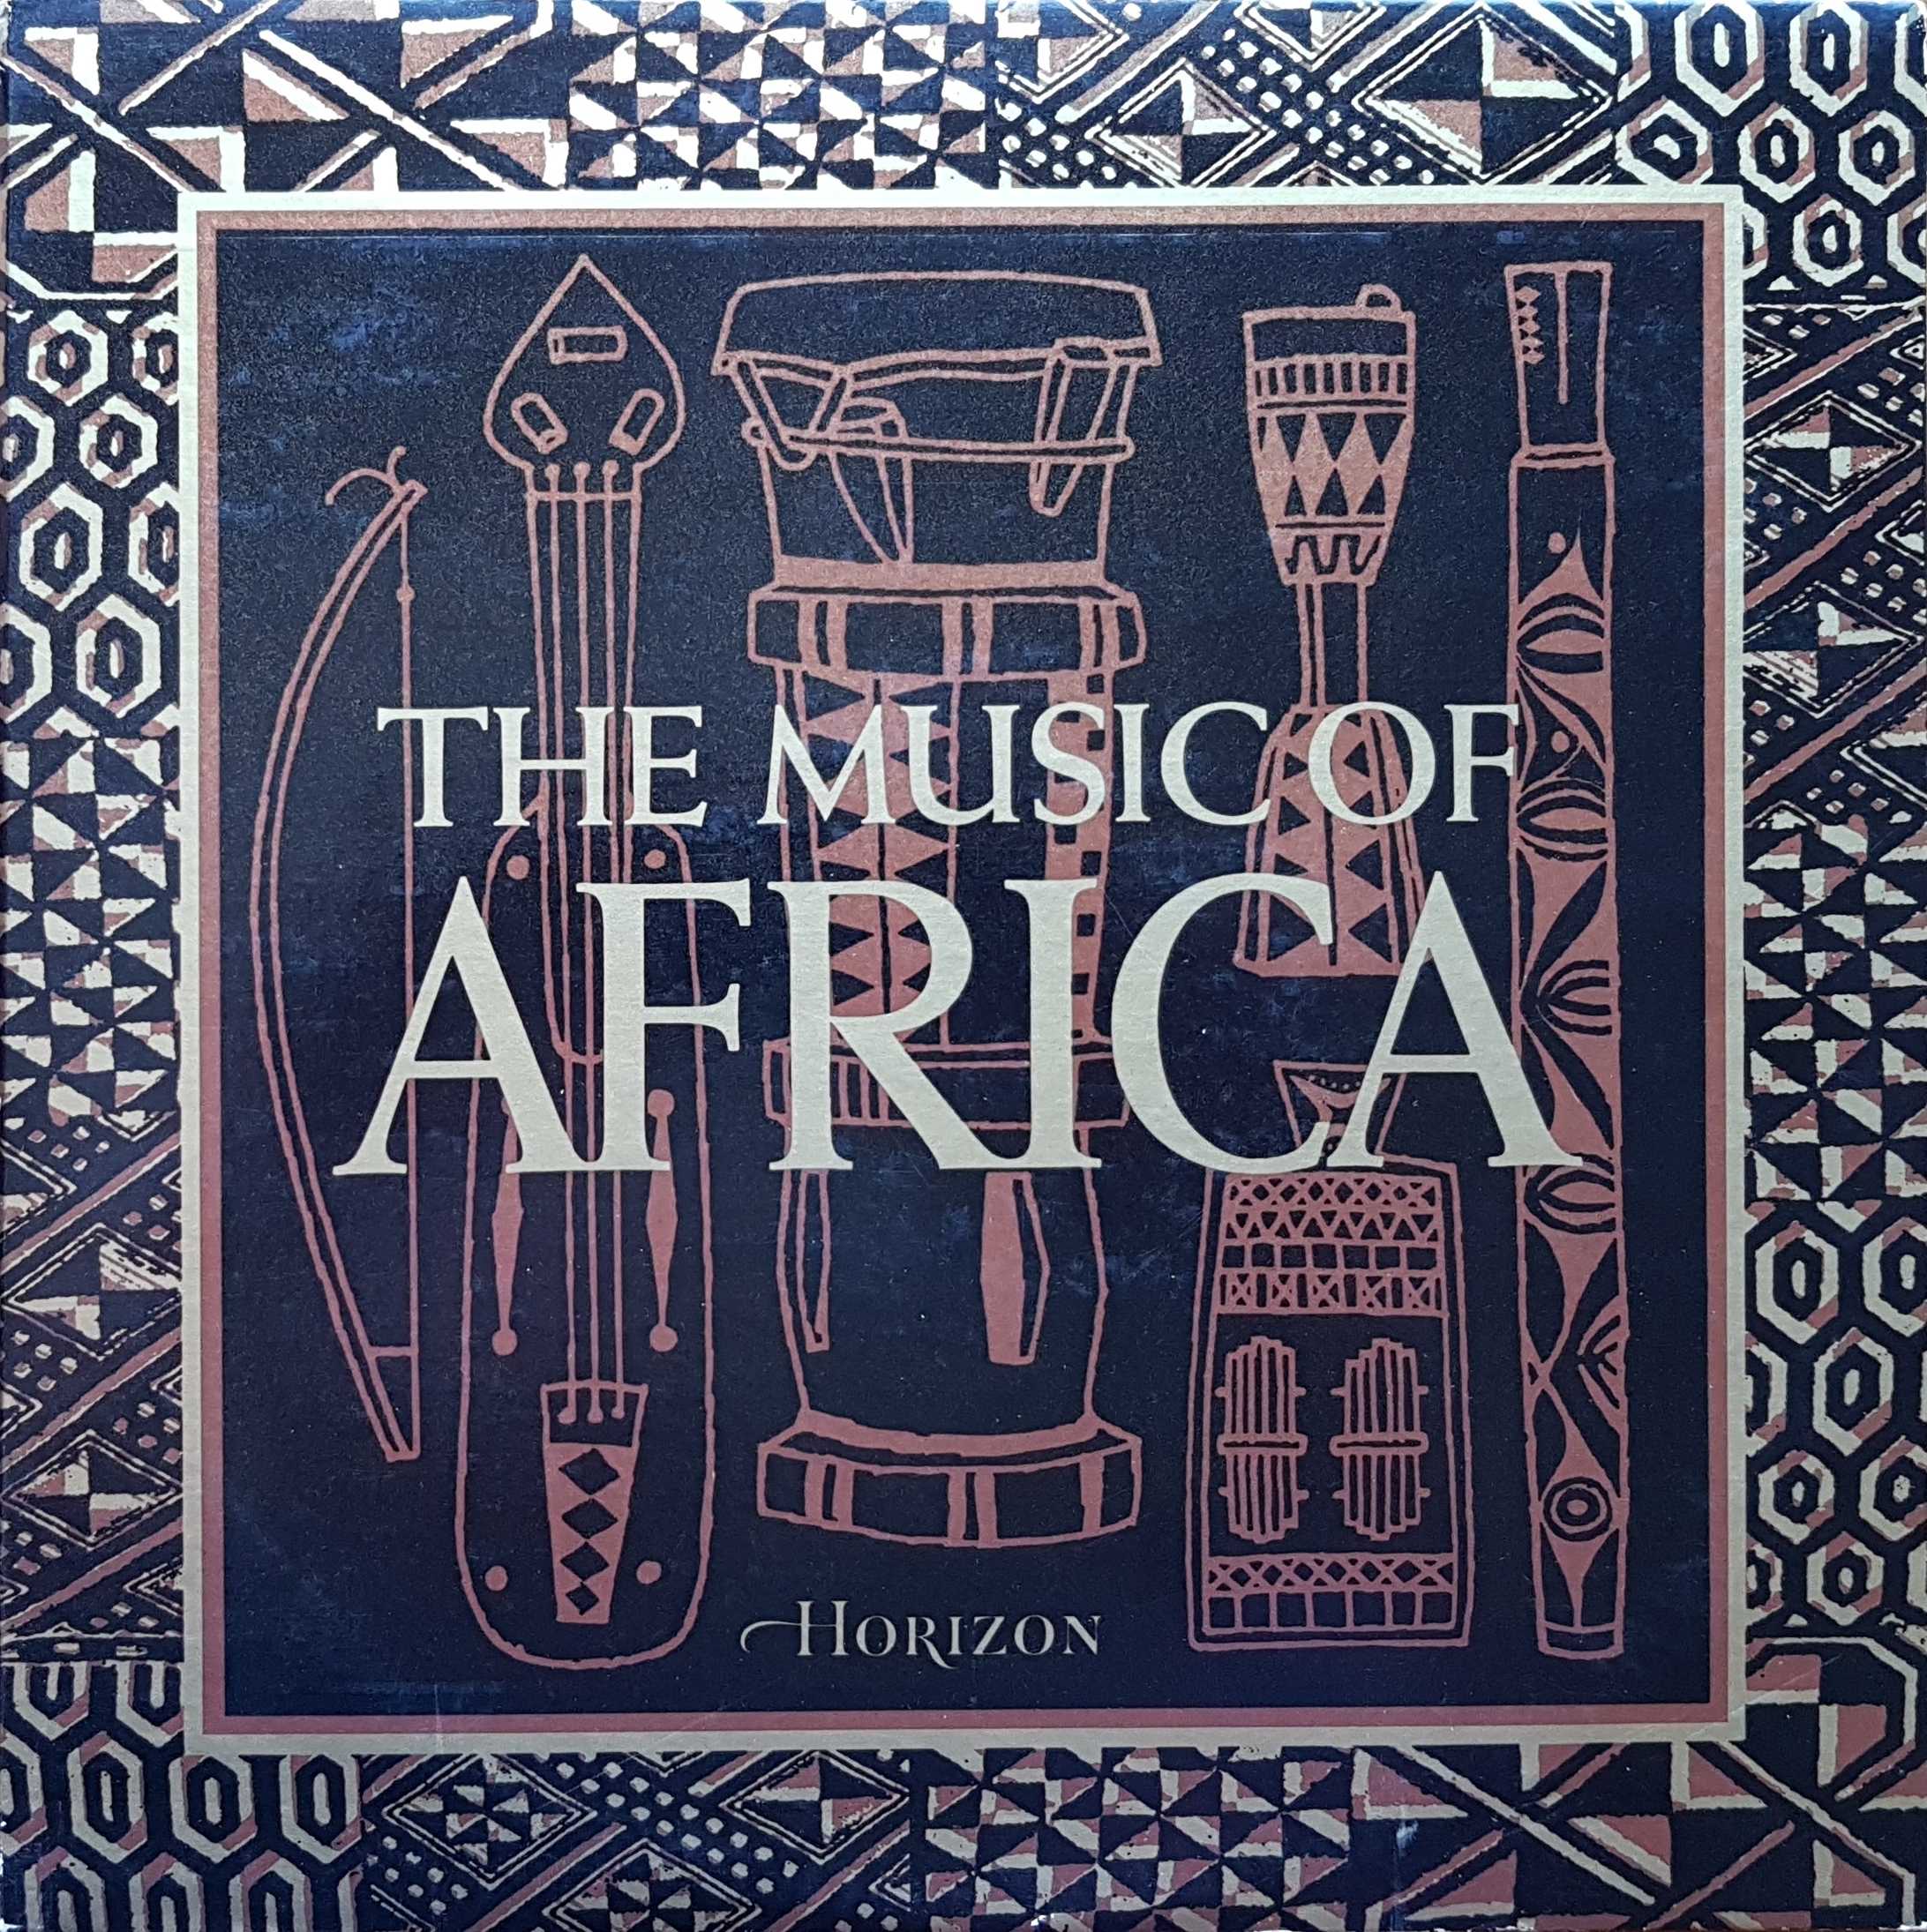 Picture of RDC - 4393 The music of Africa (US import) by artist Various from the BBC albums - Records and Tapes library